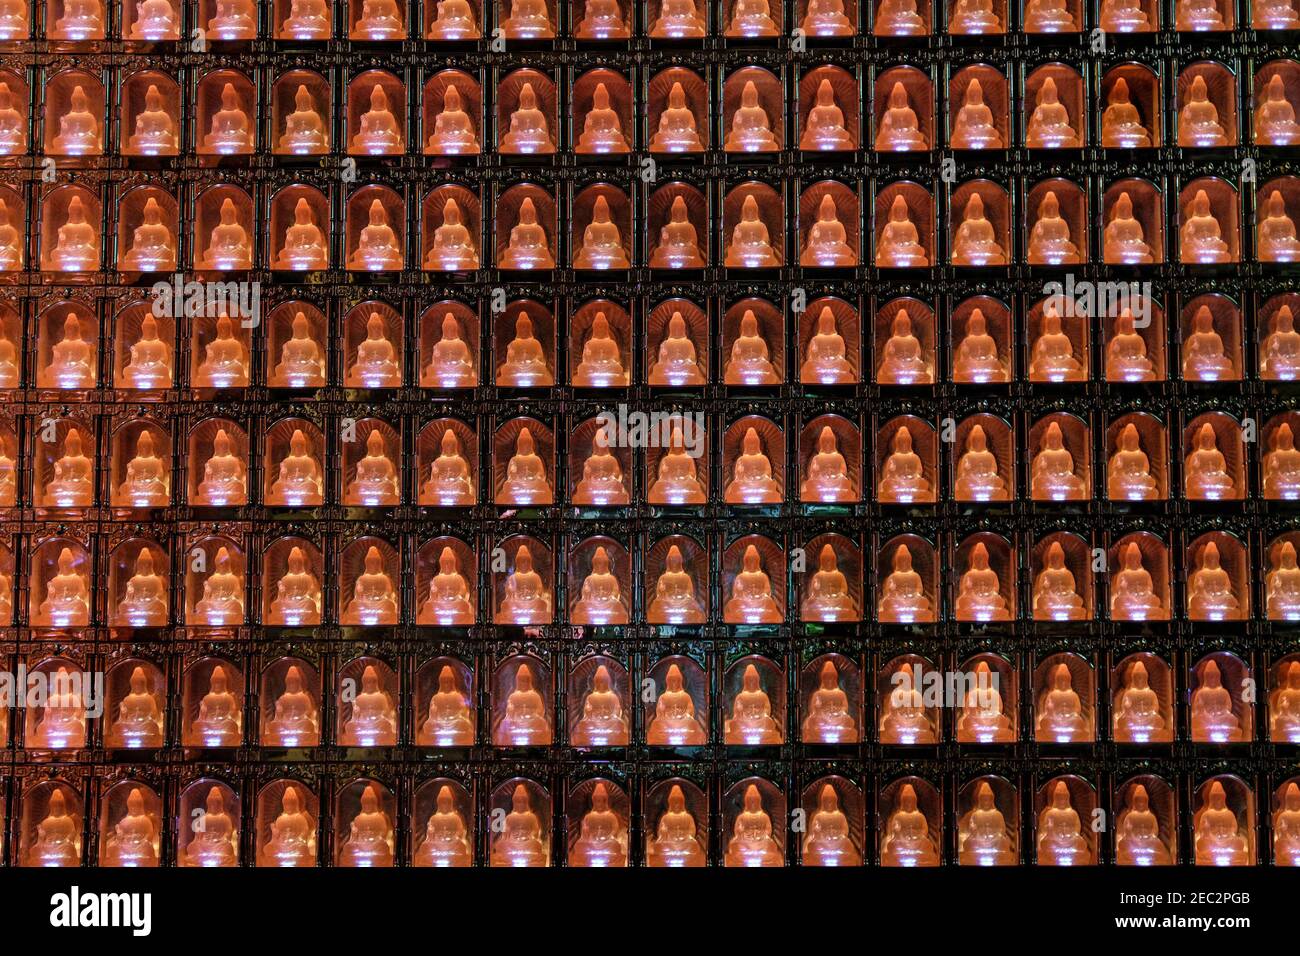 Ongpin St., Binondo, Manila, Philippines. 13th Feb, 2021. Hundreds of small Buddha statues as seen inside Seng Guan Buddhist Temple in Divisoria, Tondo Manila during the Chinese New Year. This is the first Buddhist temple in the country and usually people flock this place during Chinese New Year. Credit: Majority World CIC/Alamy Live News Stock Photo